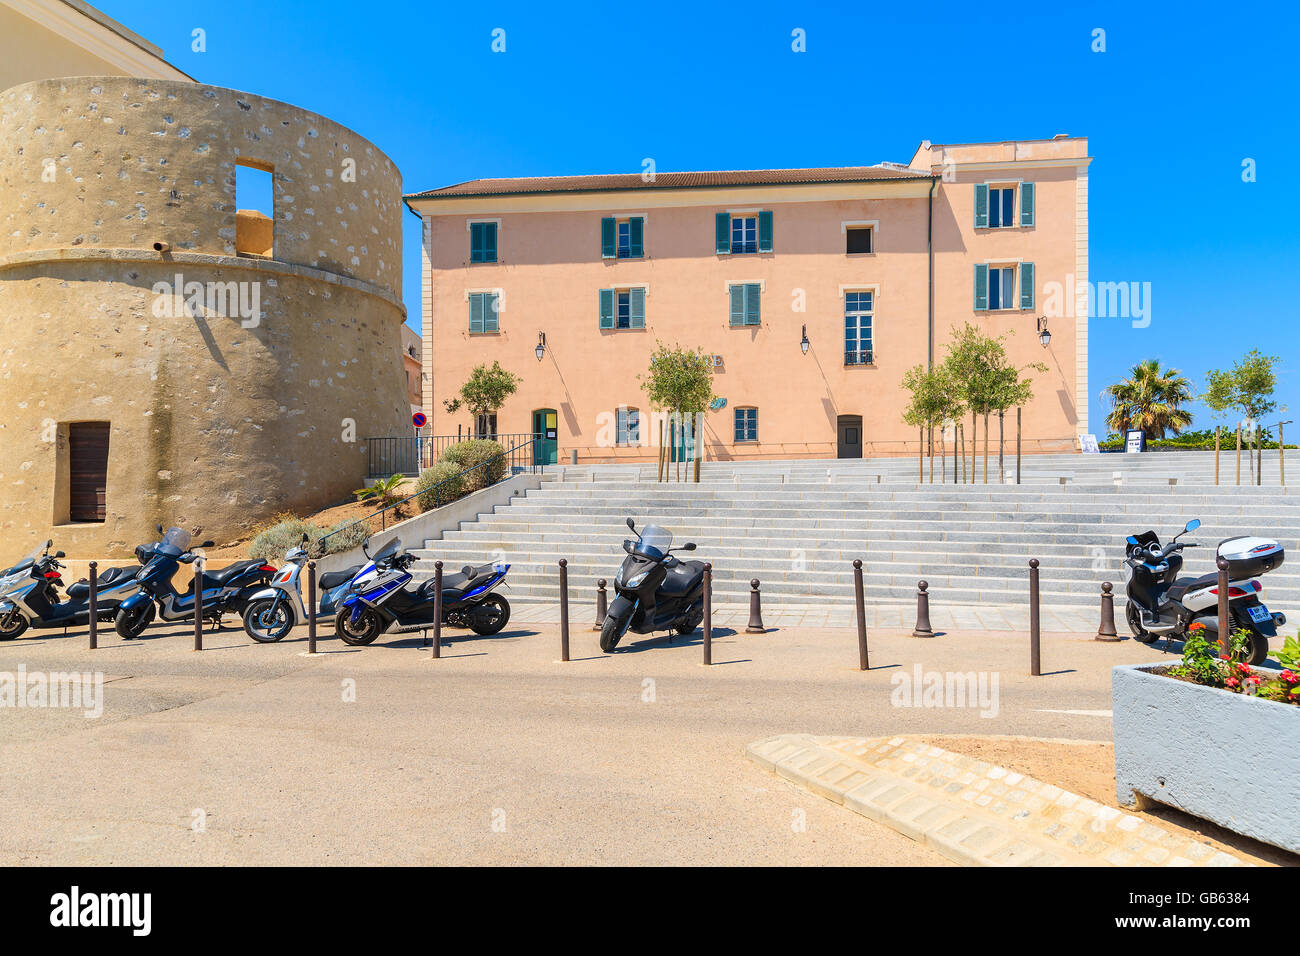 ILE ROUSEE, CORSICA ISLAND - JUL 2, 2015: Town hall building in historic old centre of Ile Rousse town, Corsica island, France Stock Photo